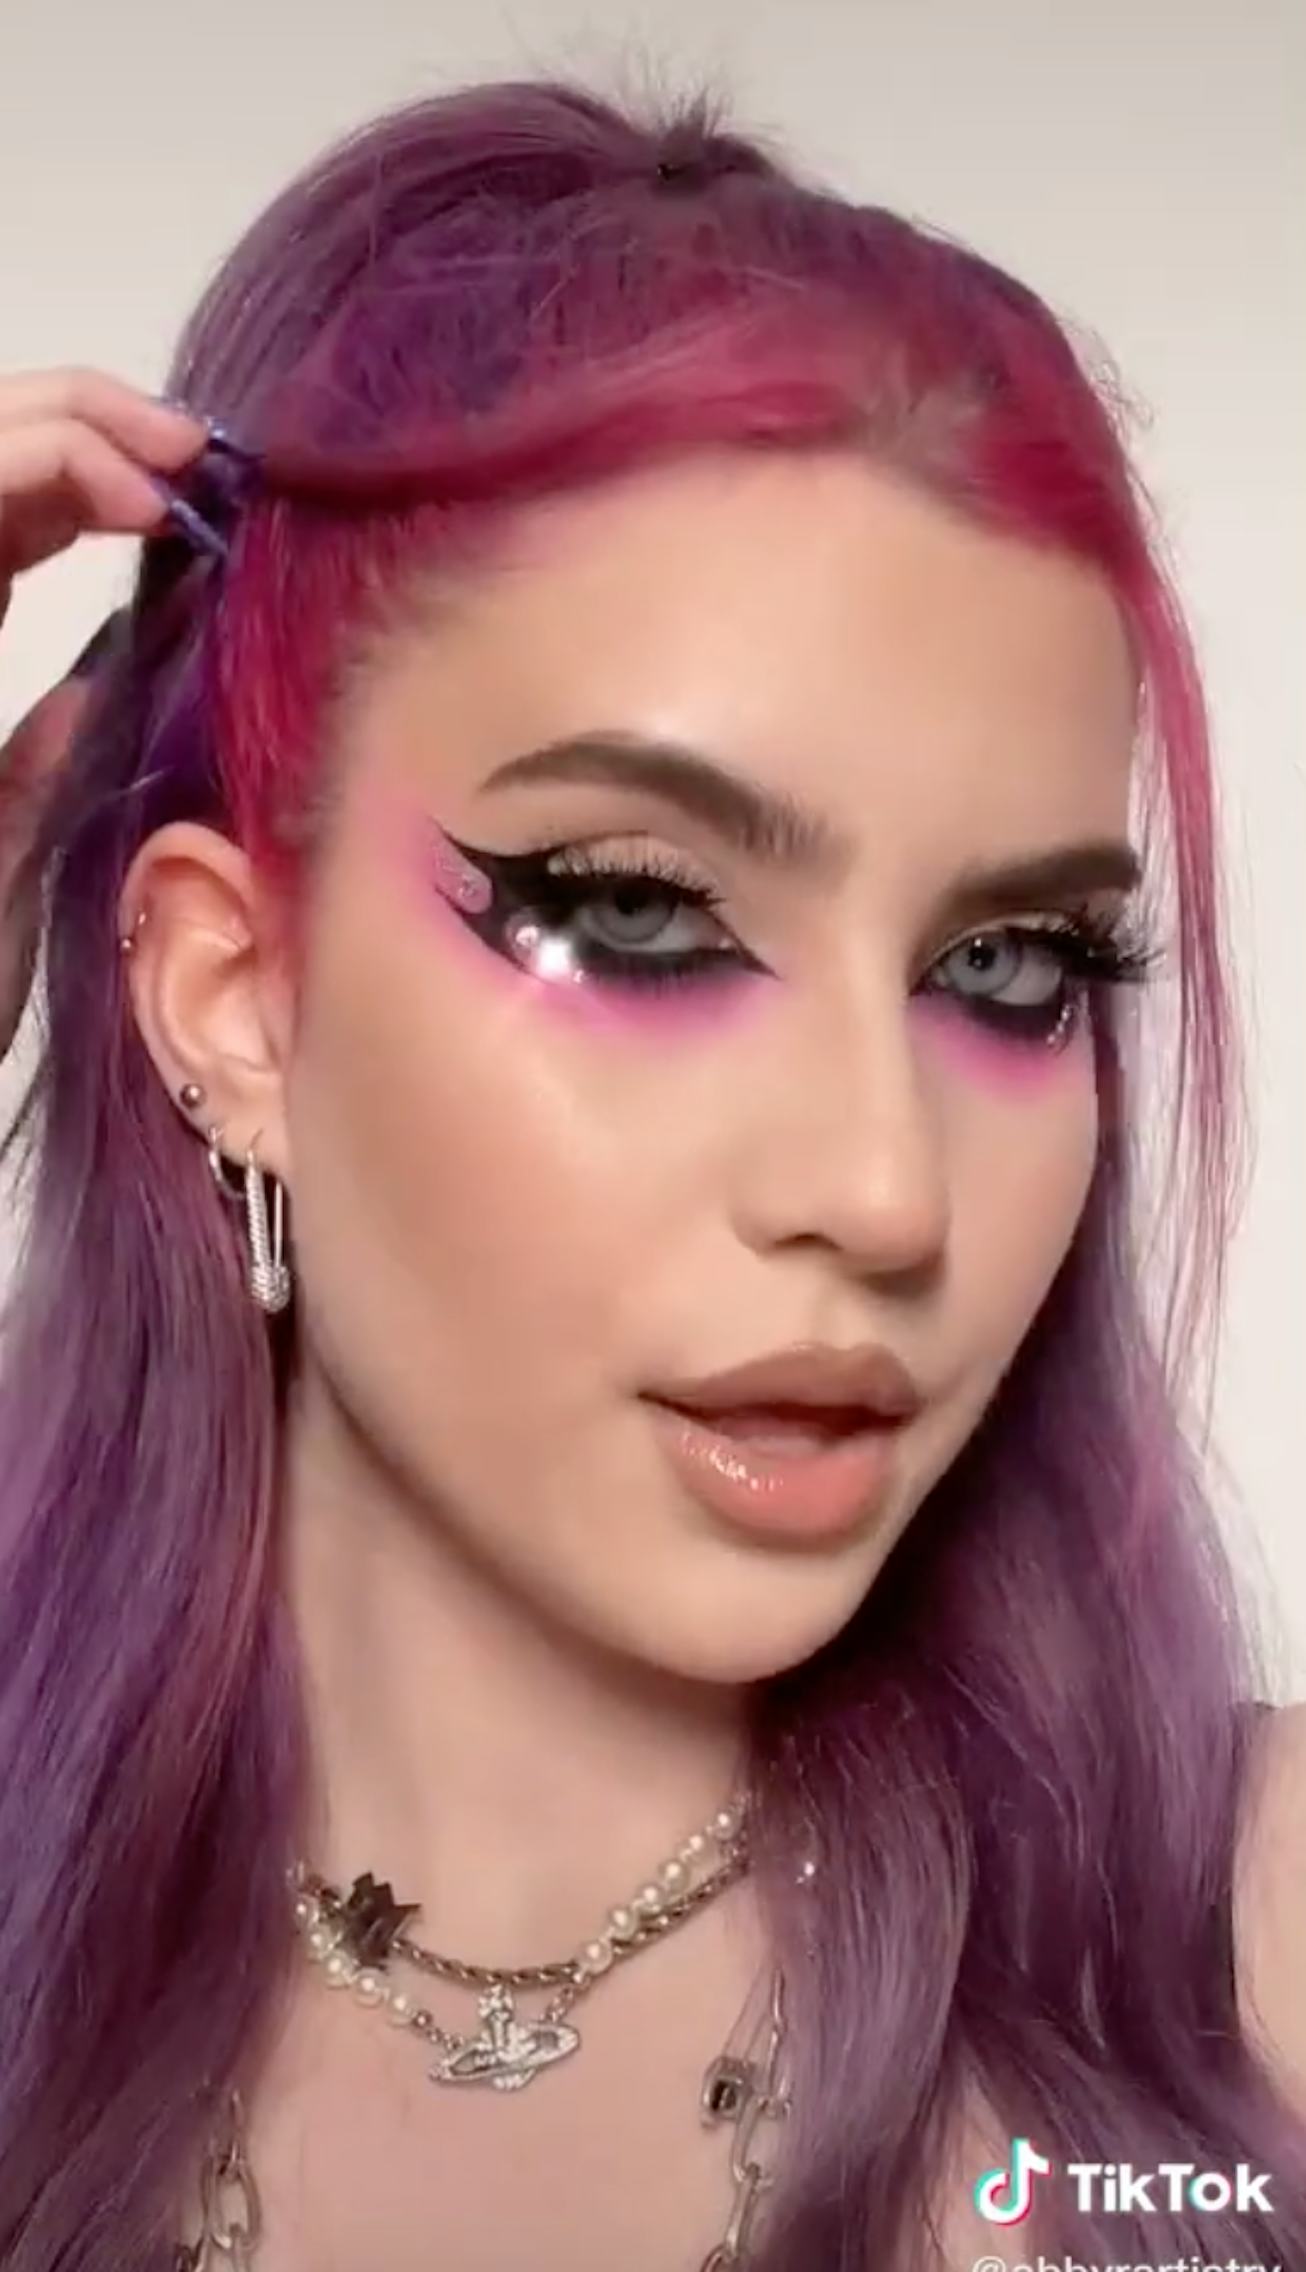 A New TikTok Trend Uses Makeup To Create Exaggerated UnderEye Bags